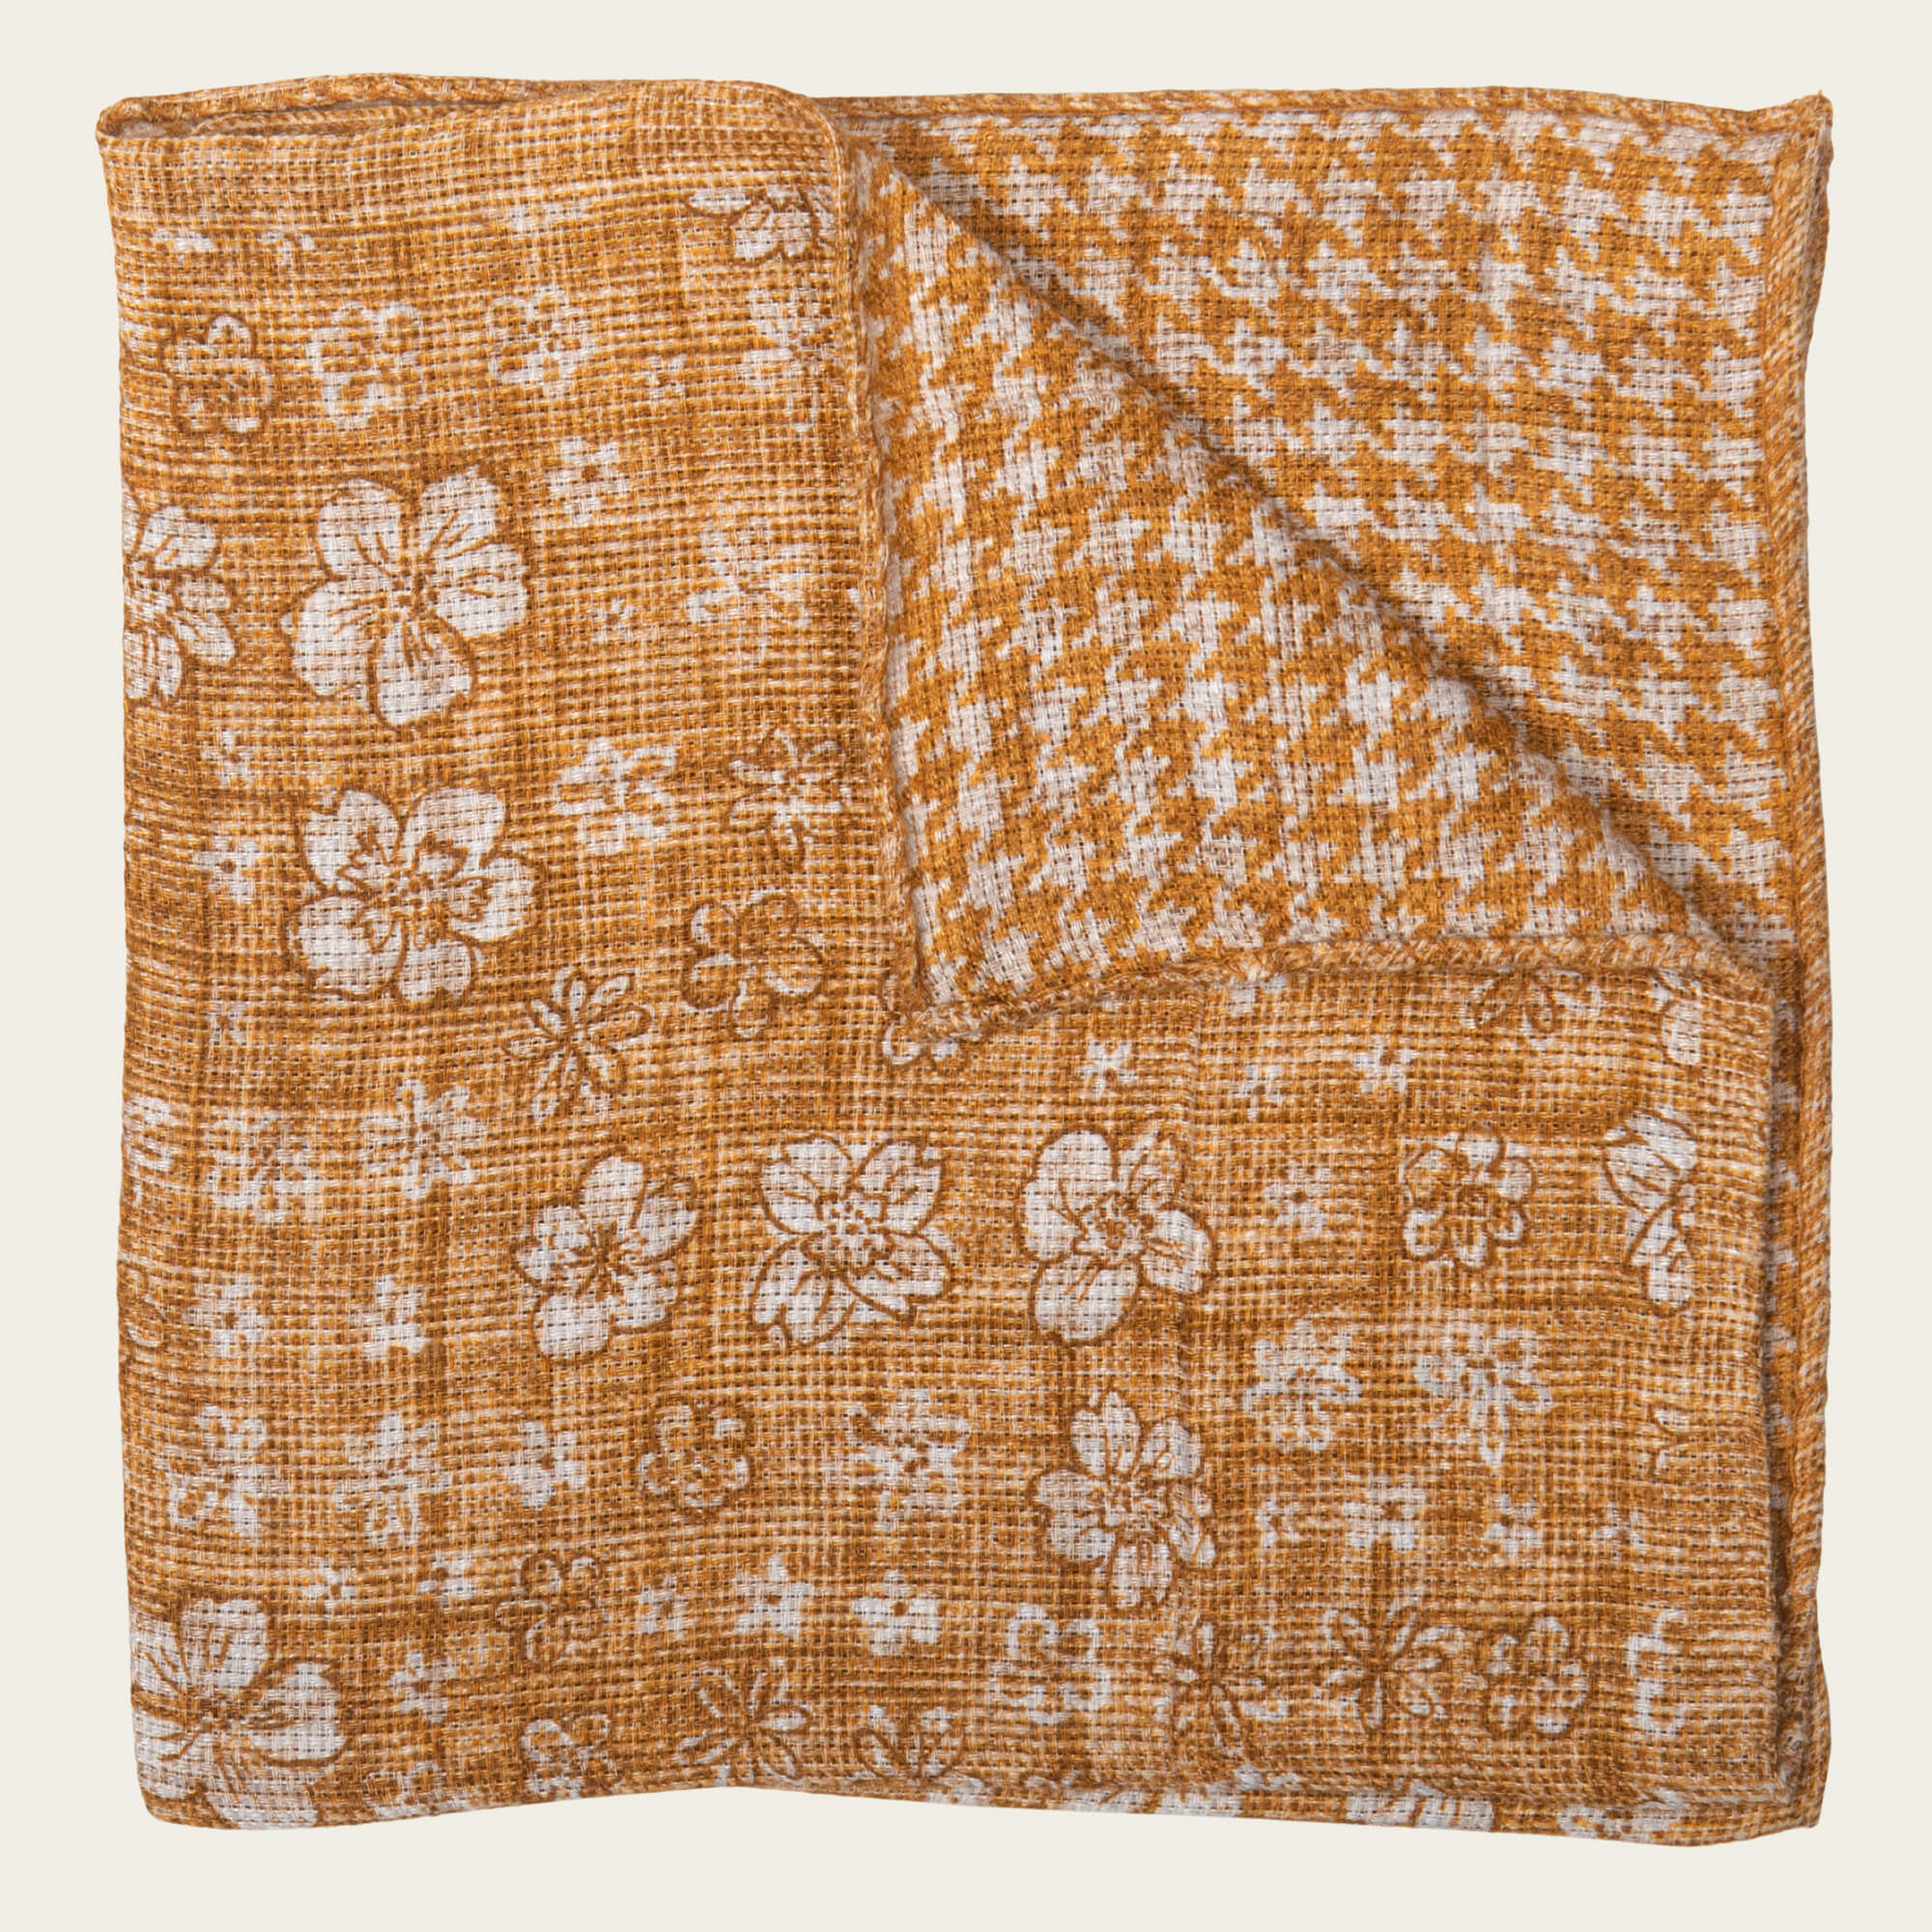 Orange With White Flower Double Sided Linen Cotton Pocket Square